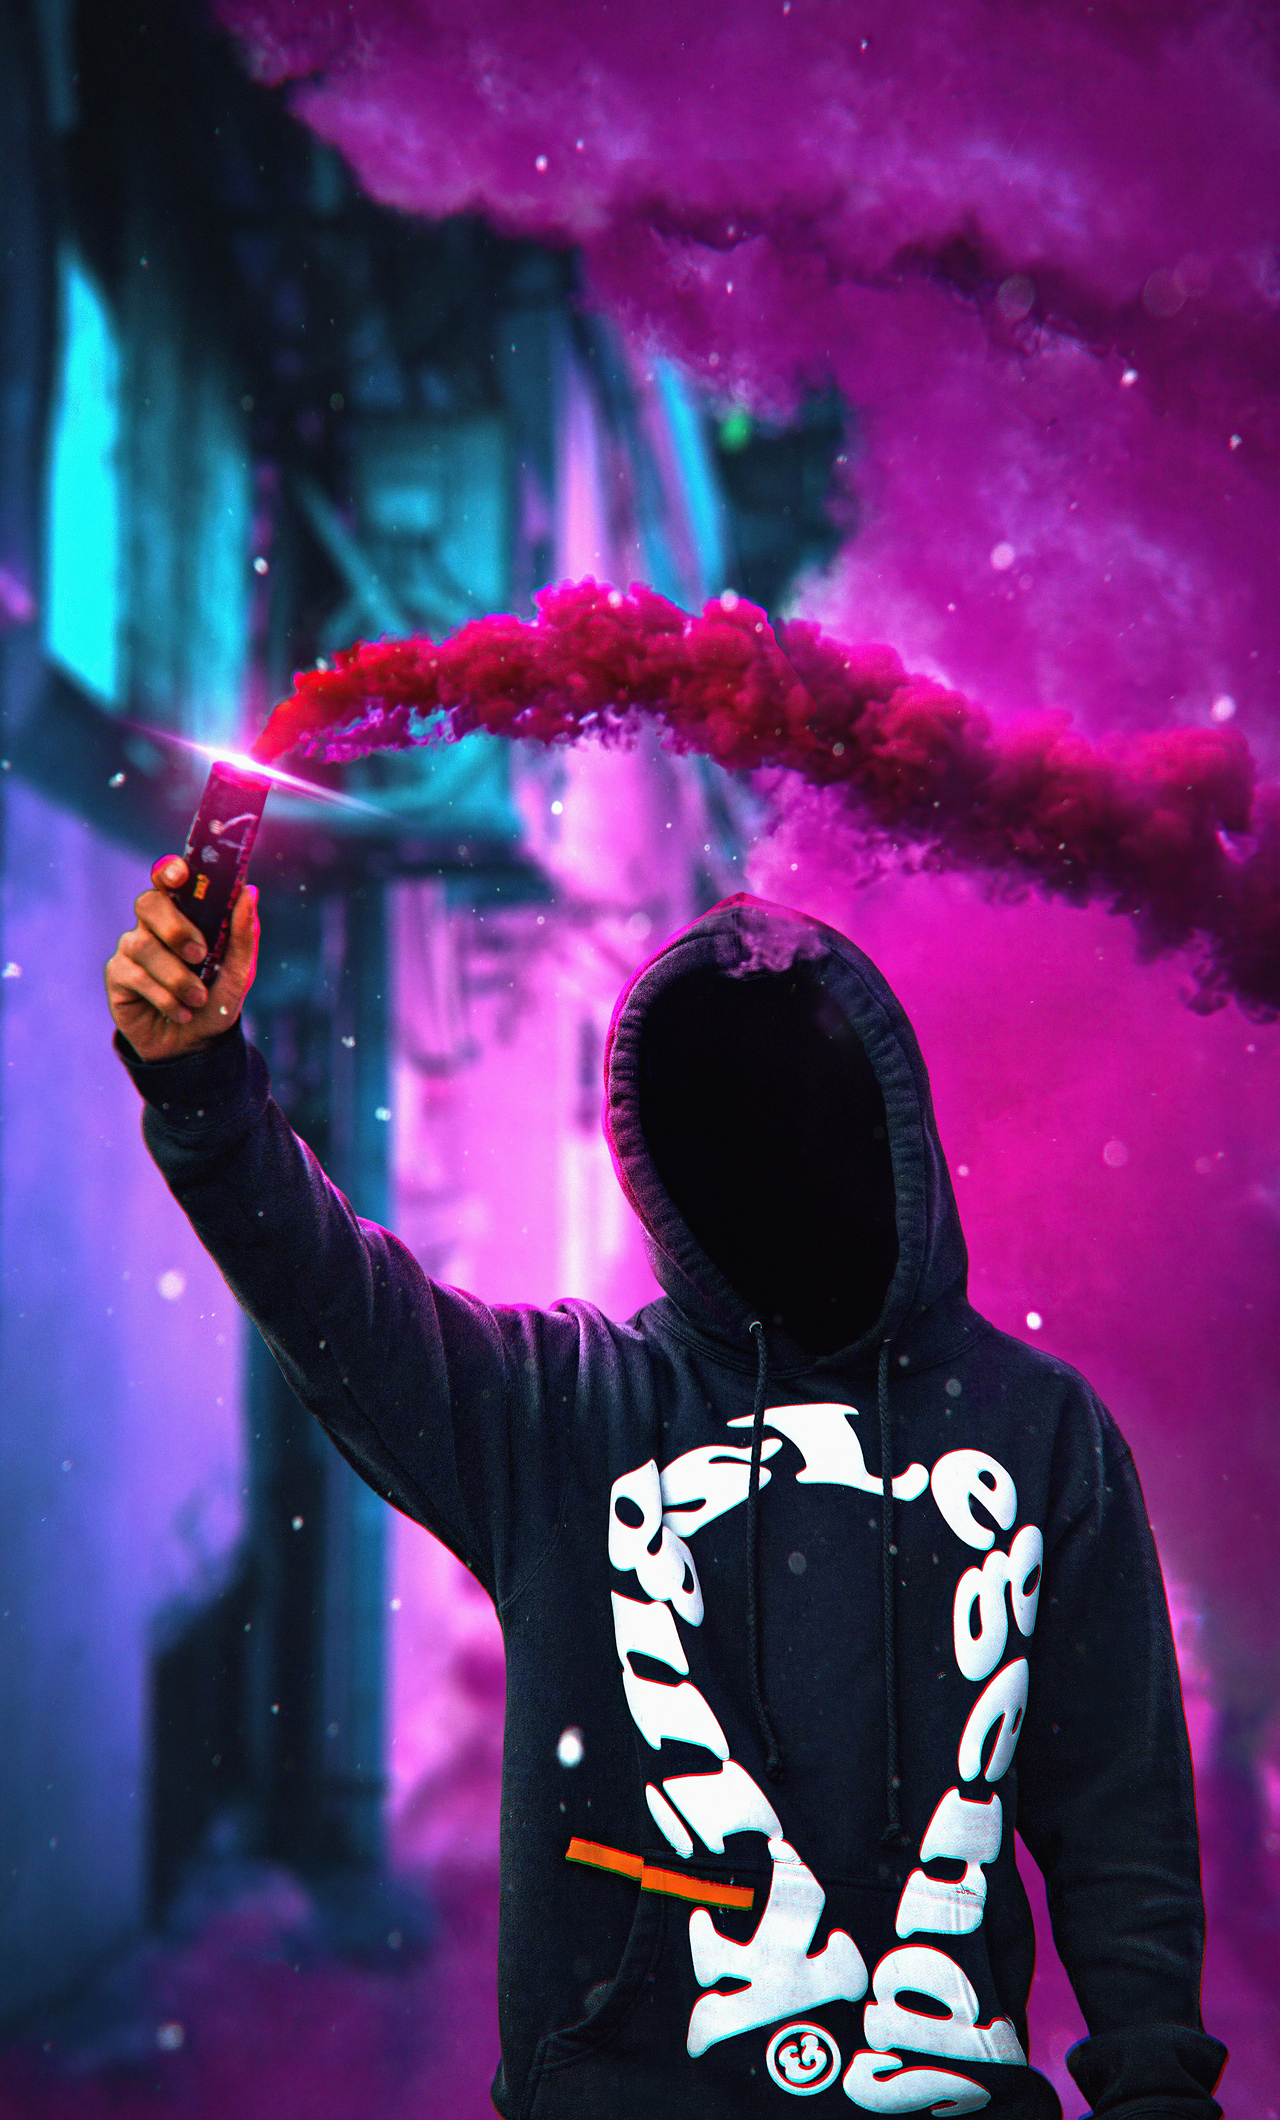 X anonymus hoodie with colorful smoke bomb k iphone hd k wallpapers images backgrounds photos and pictures